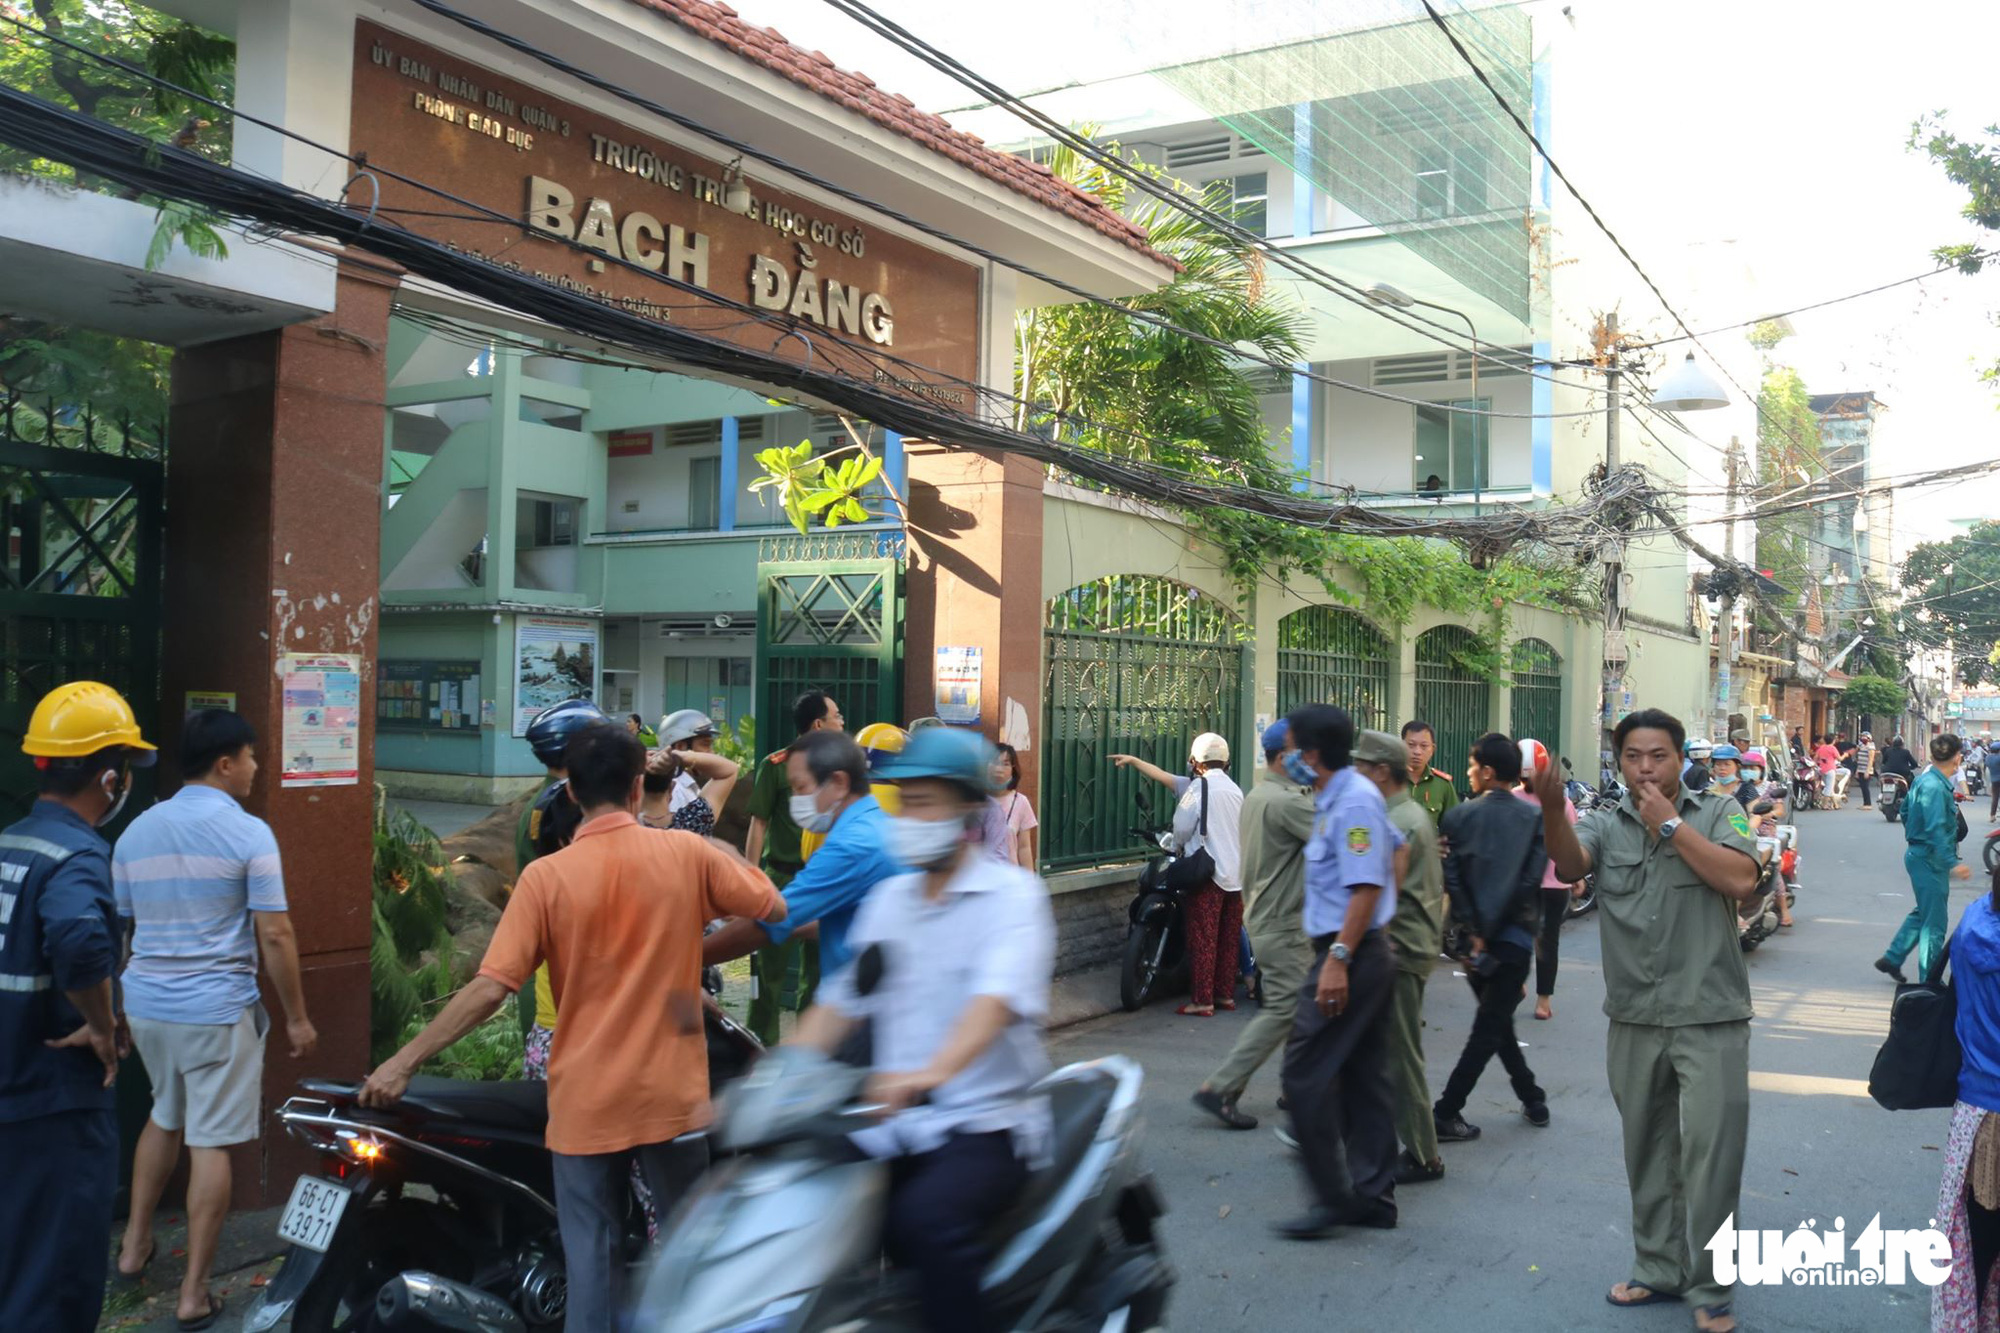 Police arrive at Bach Dang Middle School in District 3, Ho Chi Minh City, Vietnam, May 26, 2020. Photo: Trong Nhan / Tuoi Tre